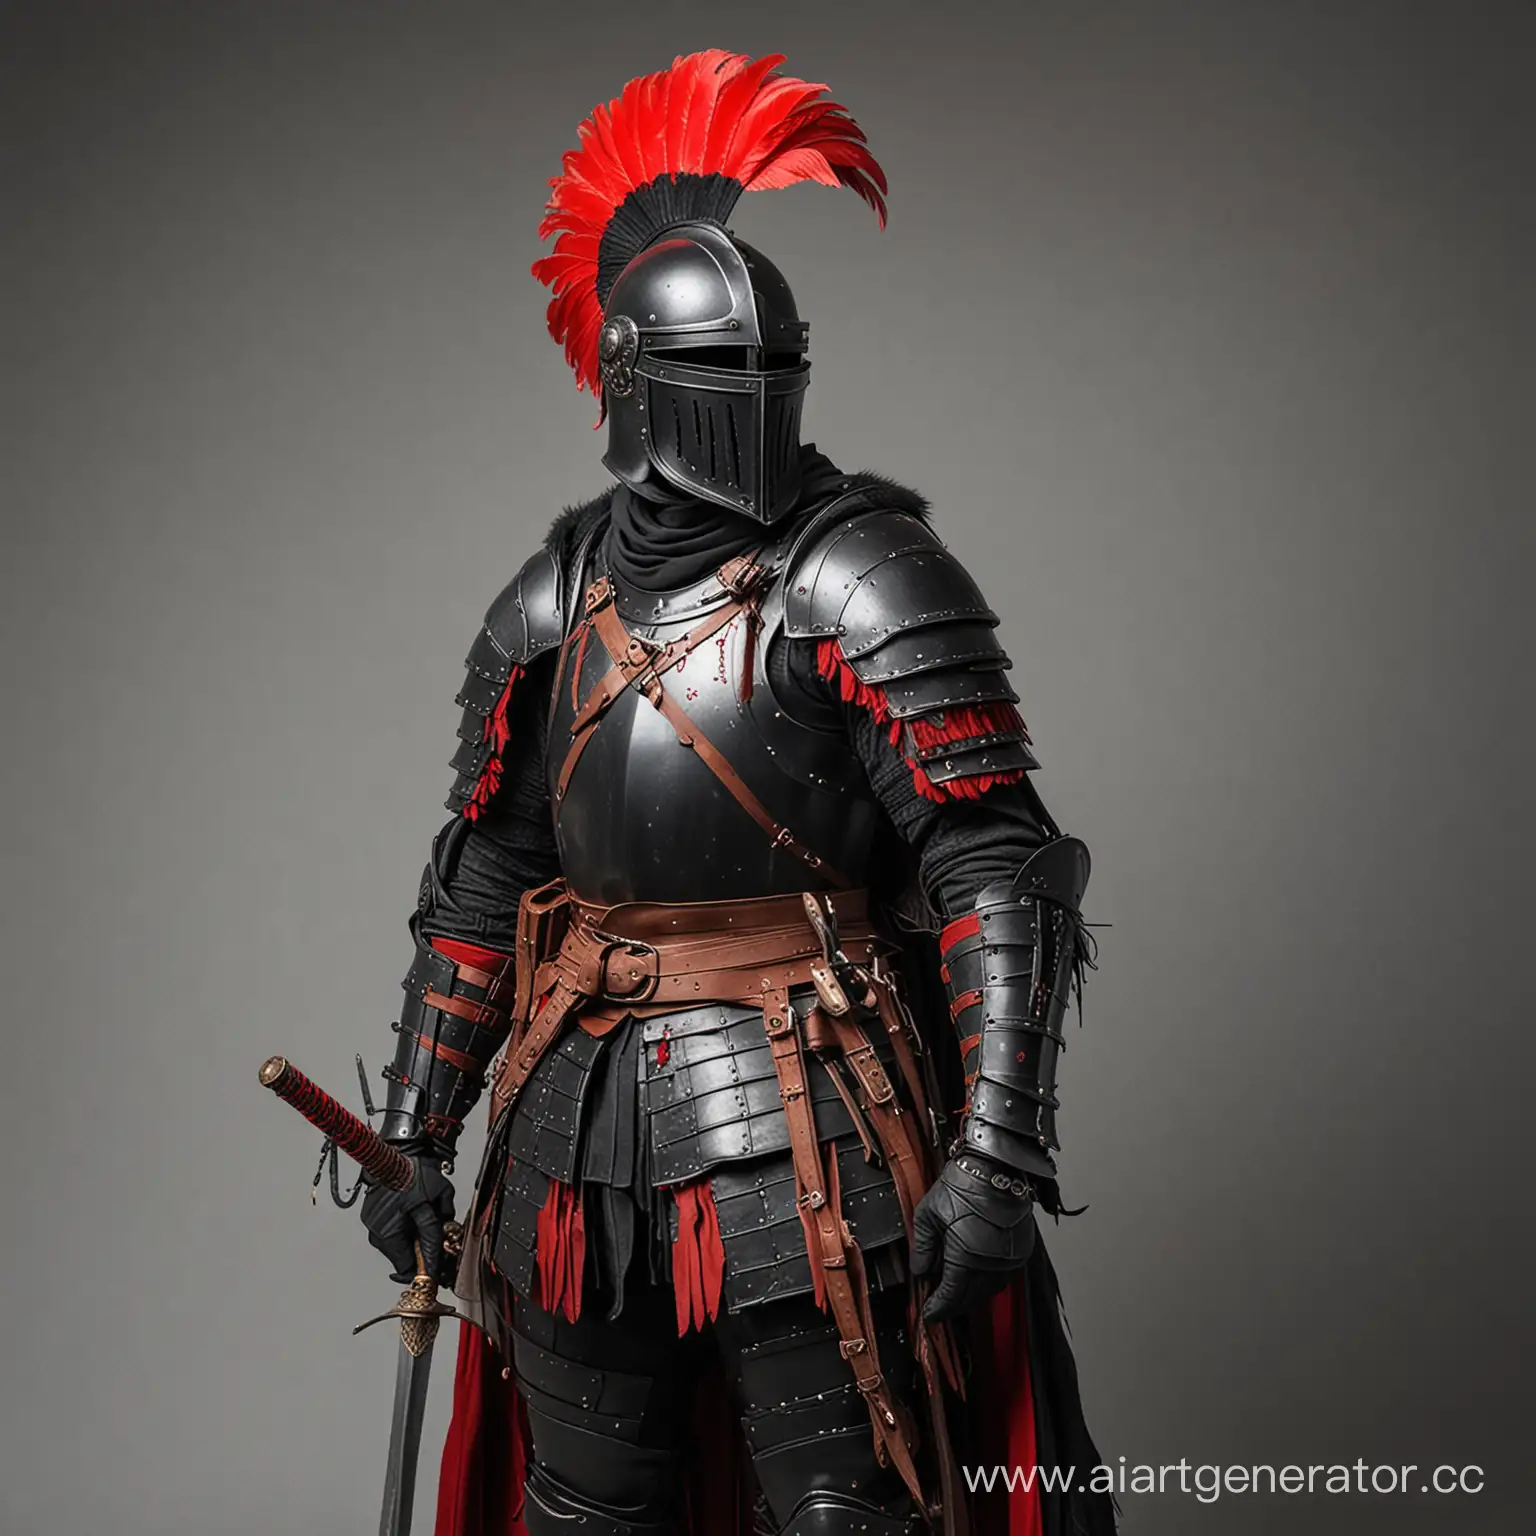 Mysterious-Knight-in-Black-Armor-with-Red-Feathered-Helmet